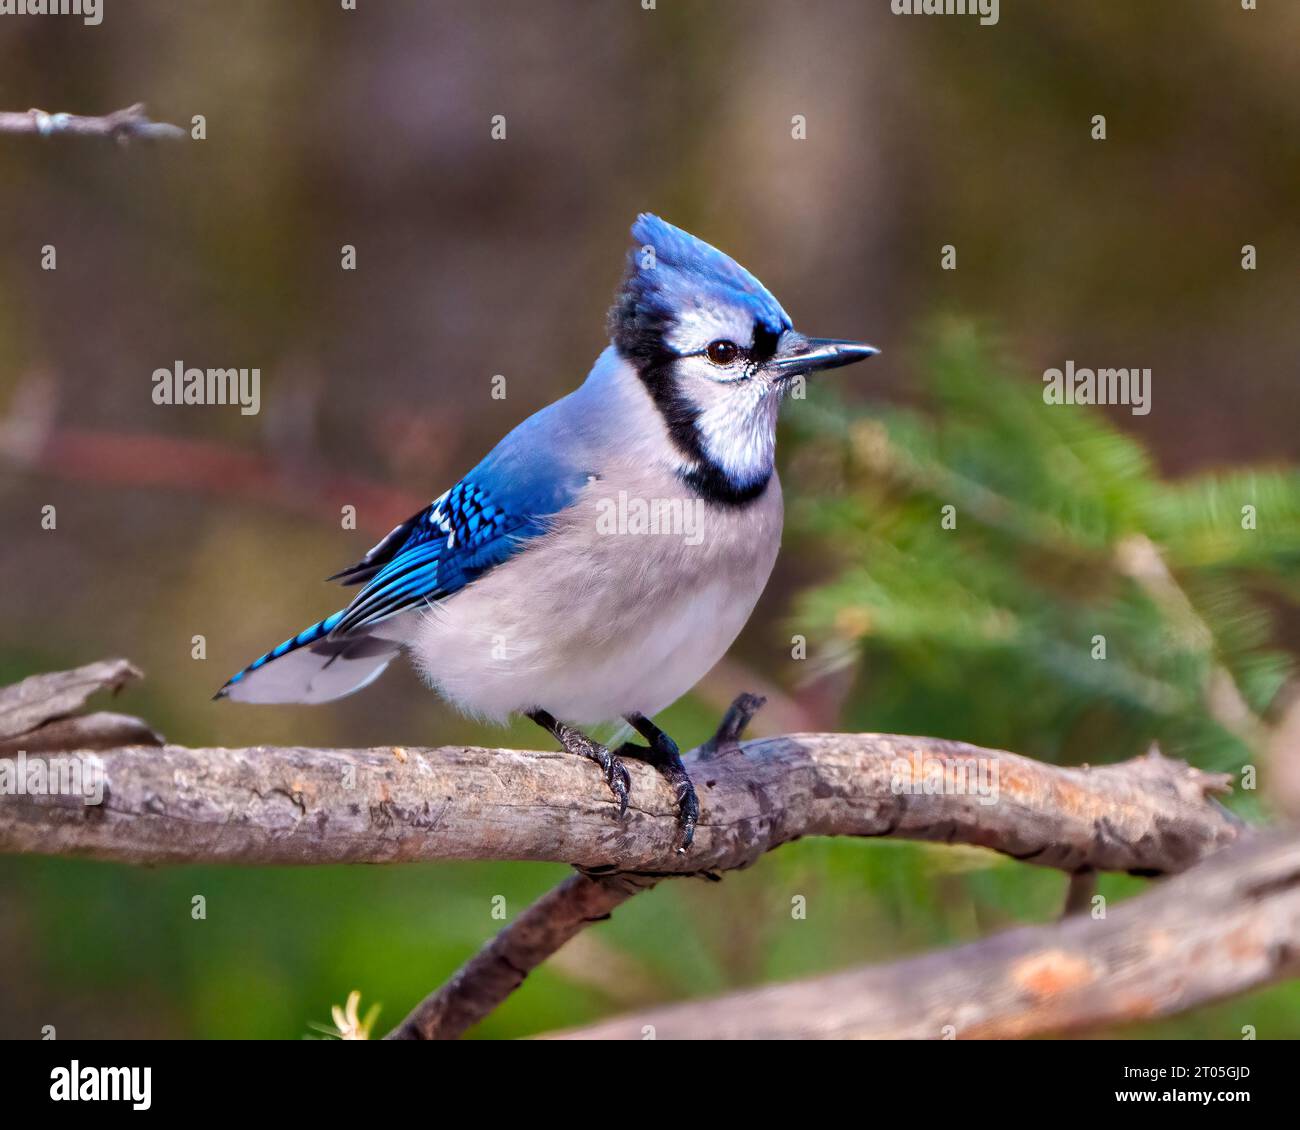 Blue Jay close-up side view perched on a branch with a blur coniferous evergreen trees background in the forest environment and habitat surrounding. Stock Photo